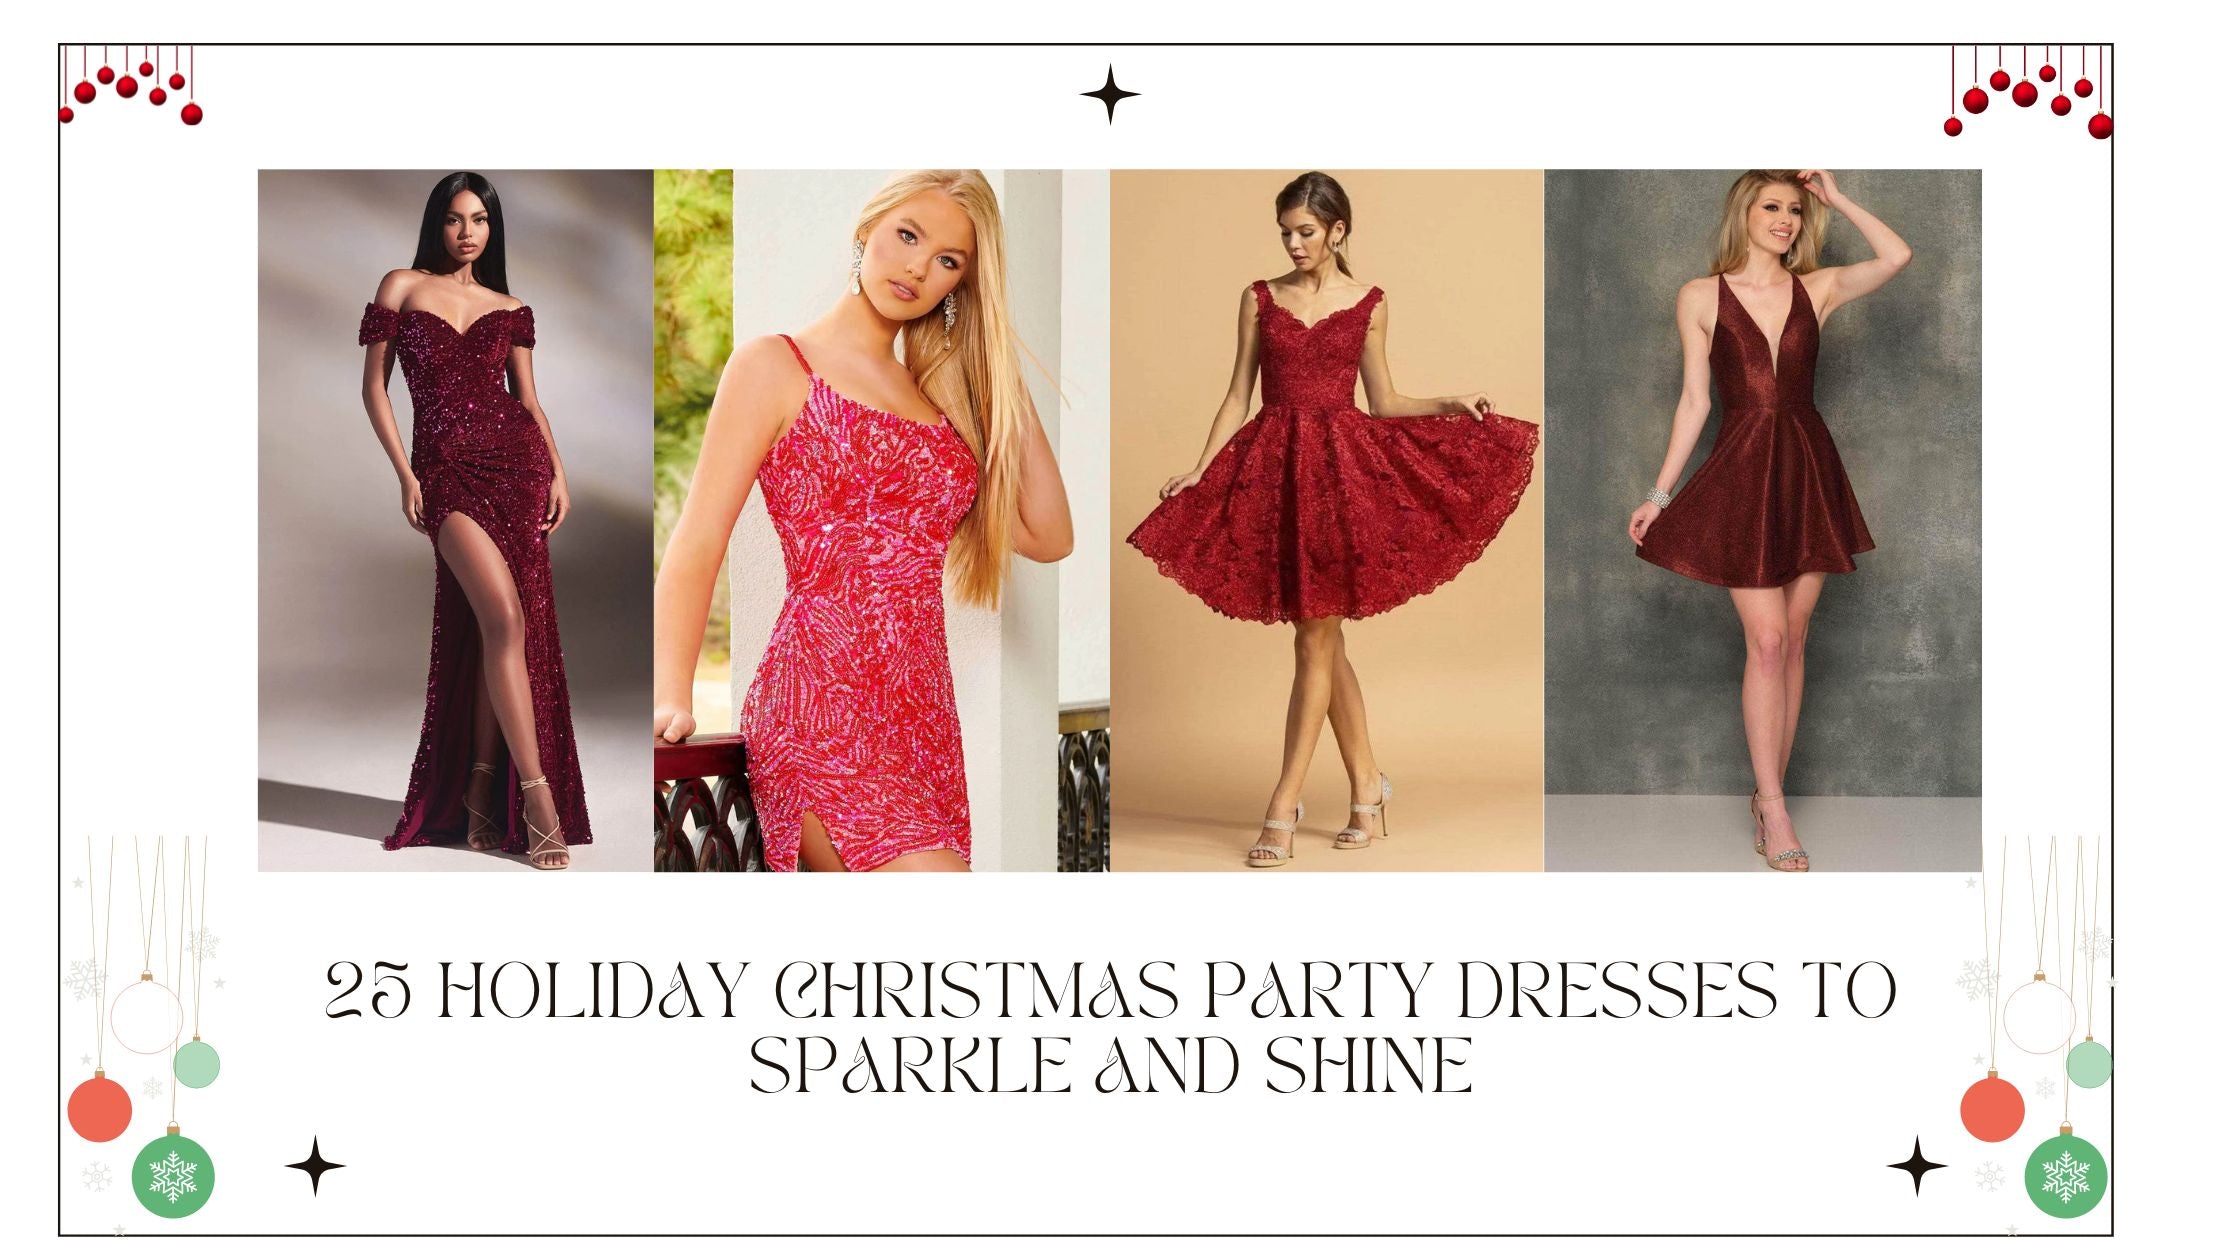 25 Holiday Christmas Party Dresses to Sparkle and Shine